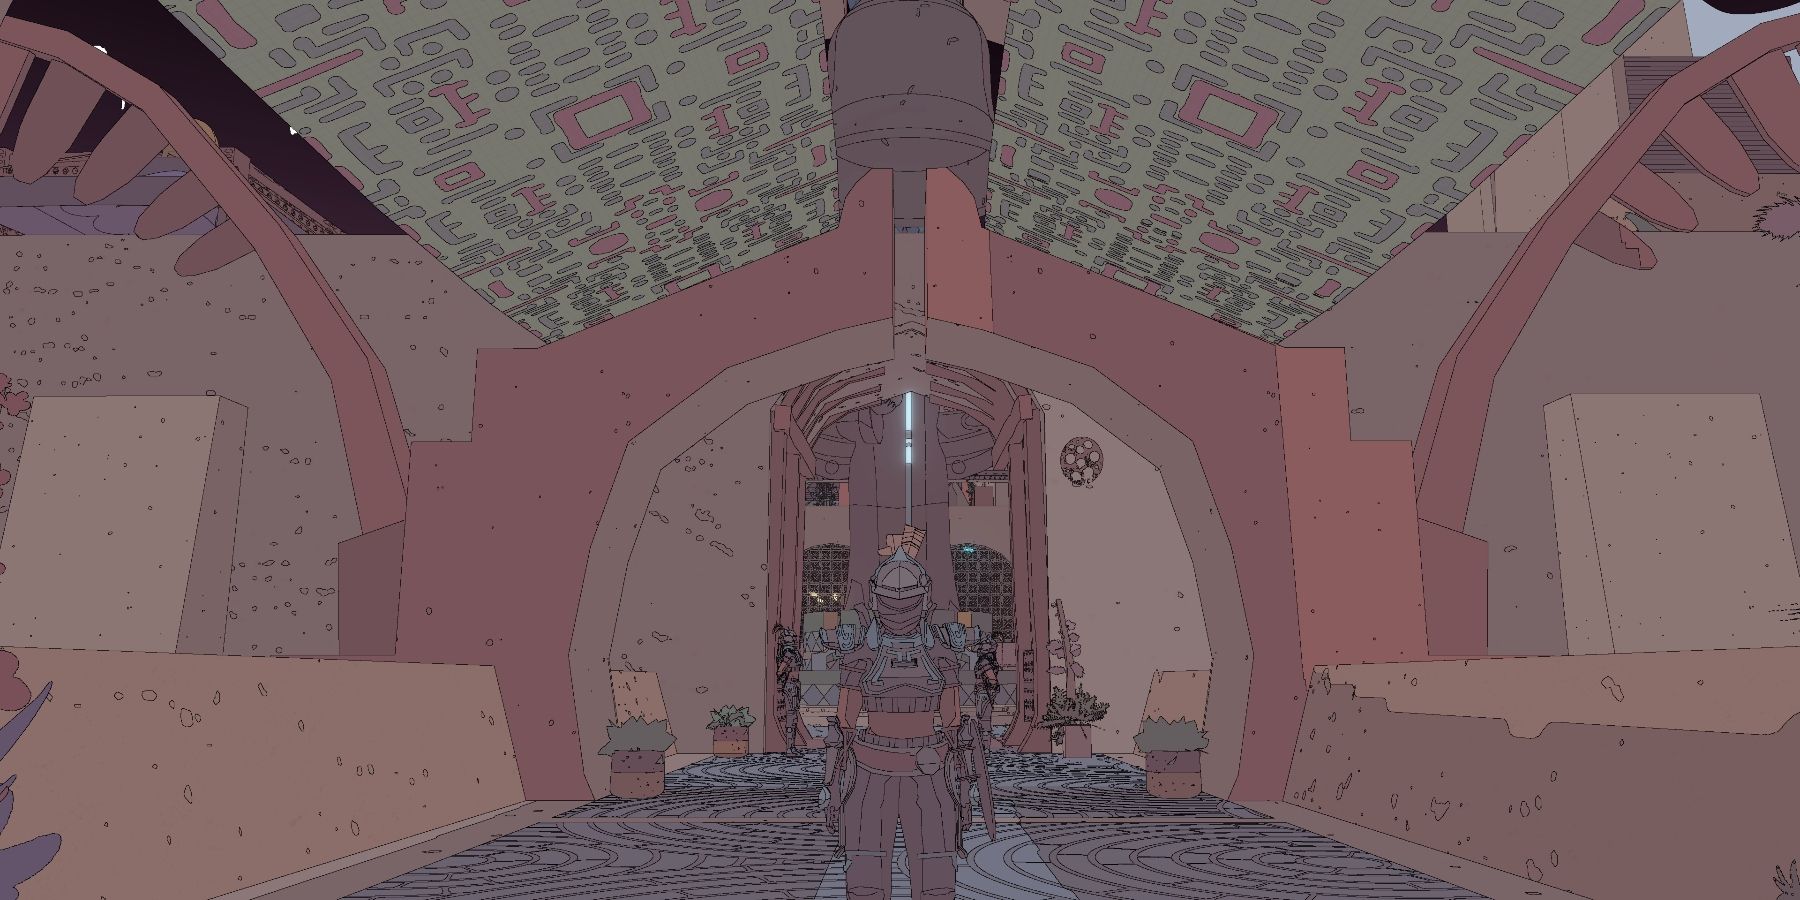 Sable in a knight's helmet standing in front of archway with banners connected to the top